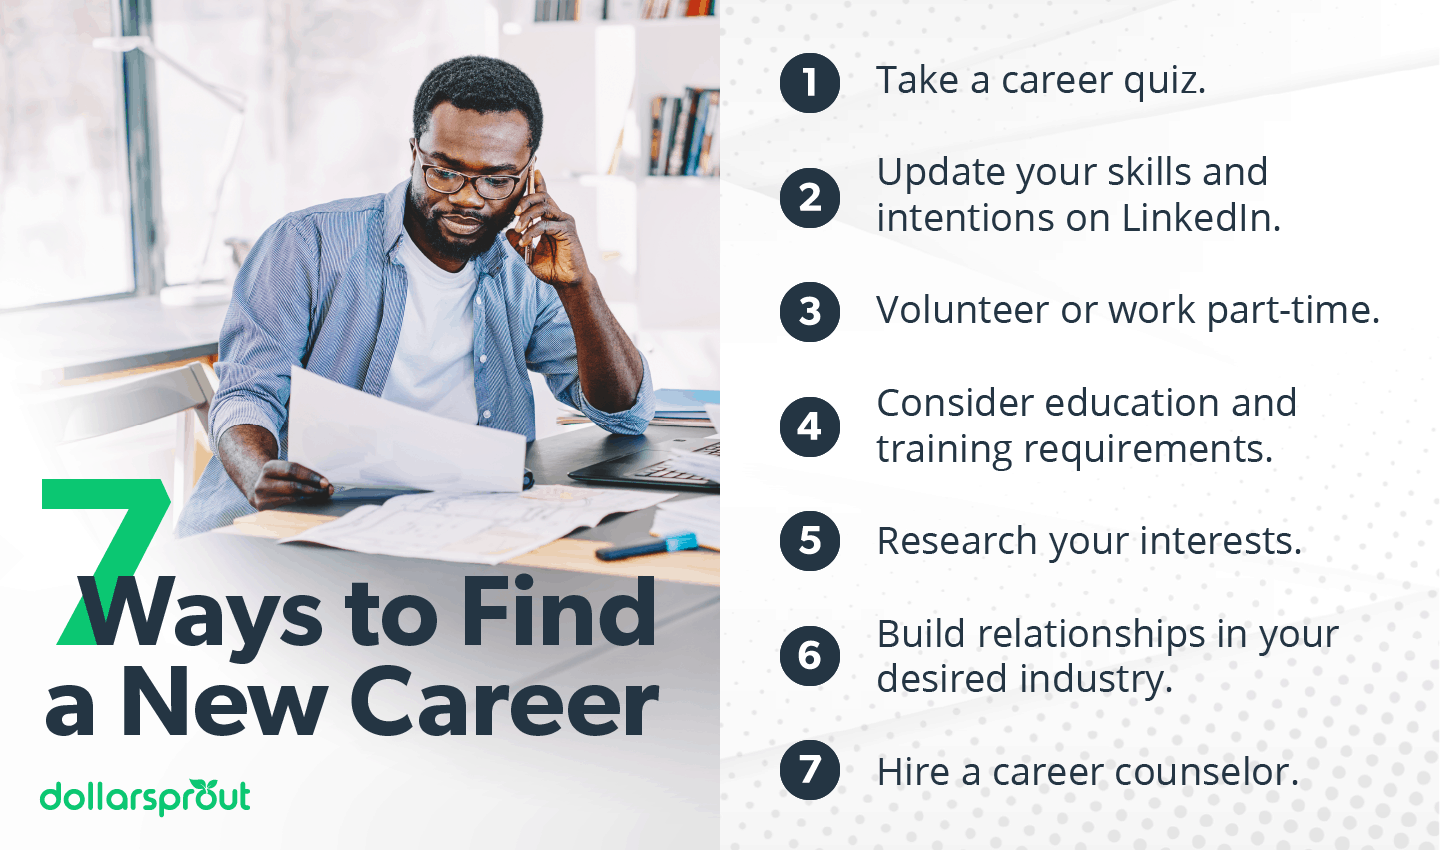 7 ways to find a new career infographic